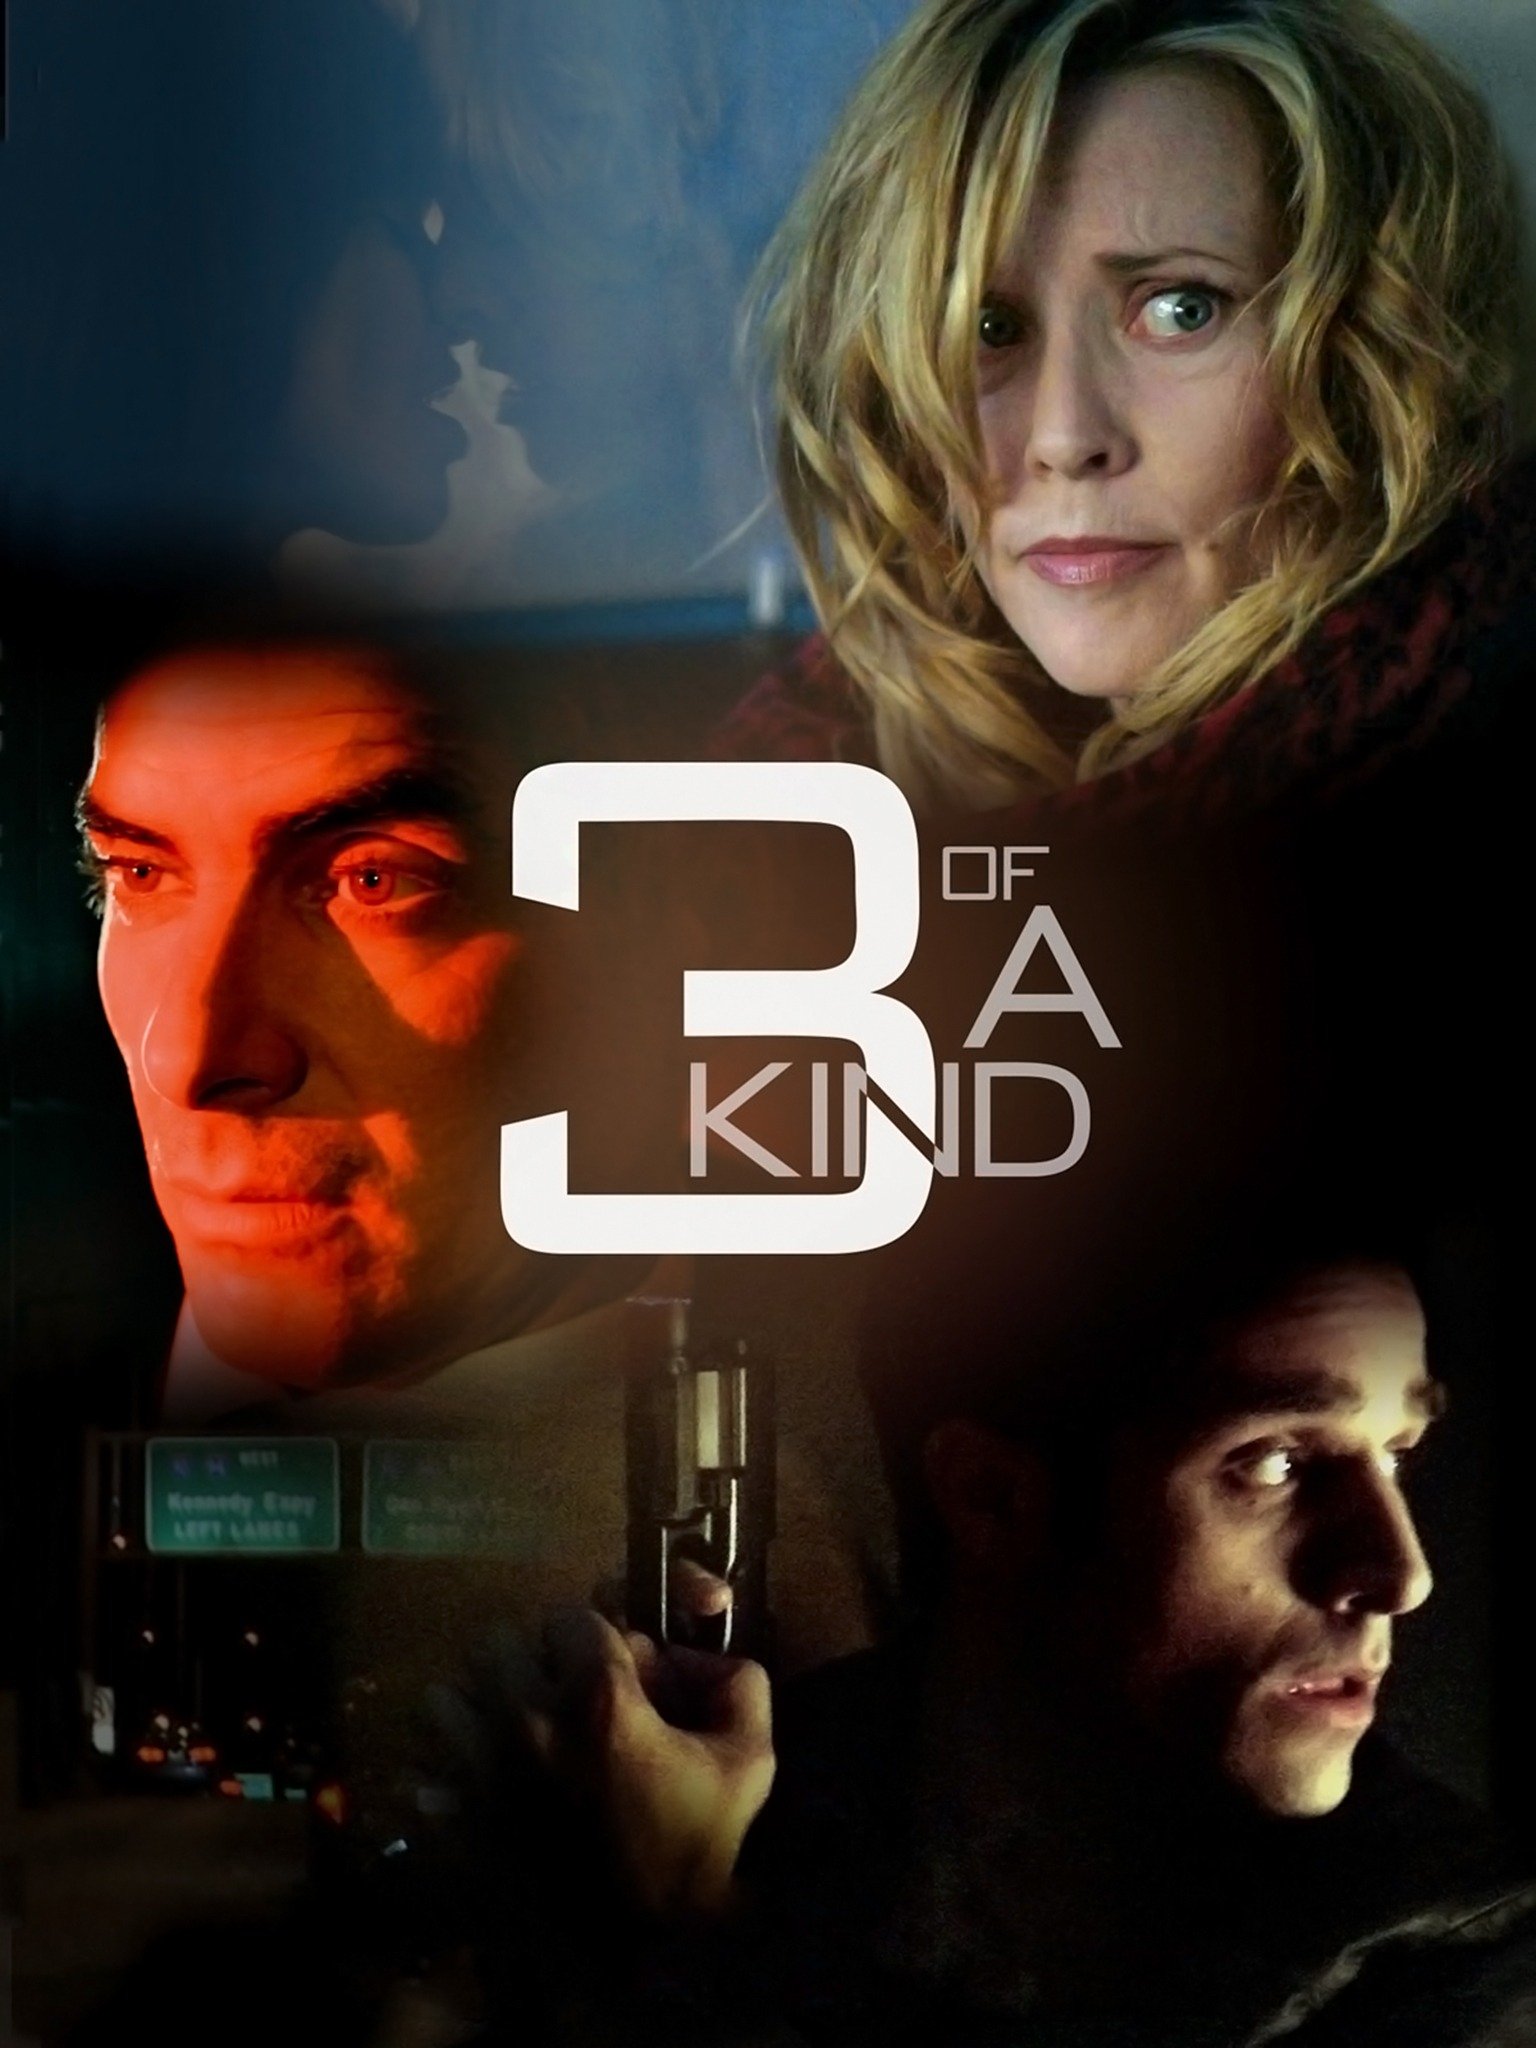 3 of a kind movie review